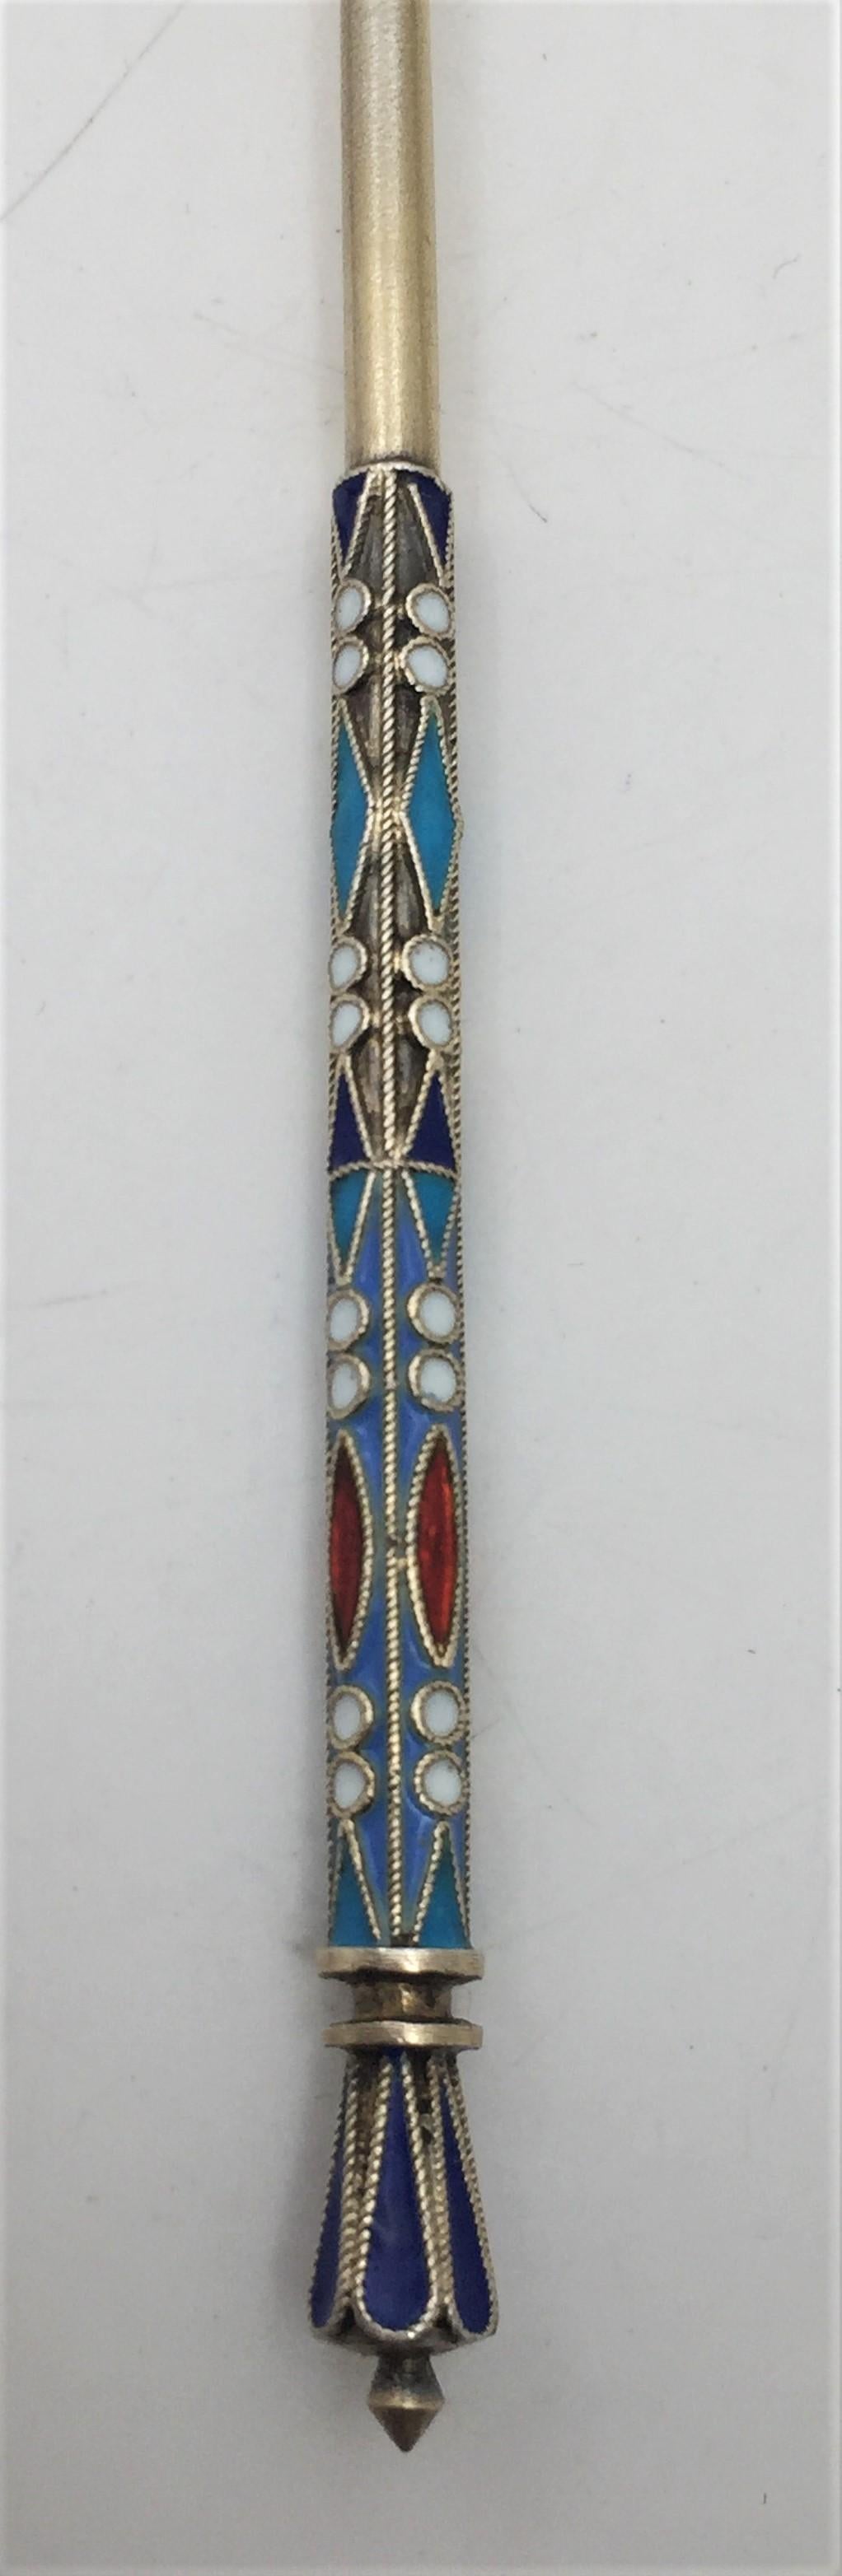 20th Century Ivan Saltykov Set of 12 Gilt Russian Silver and Enamel Spoons in Faberge Style